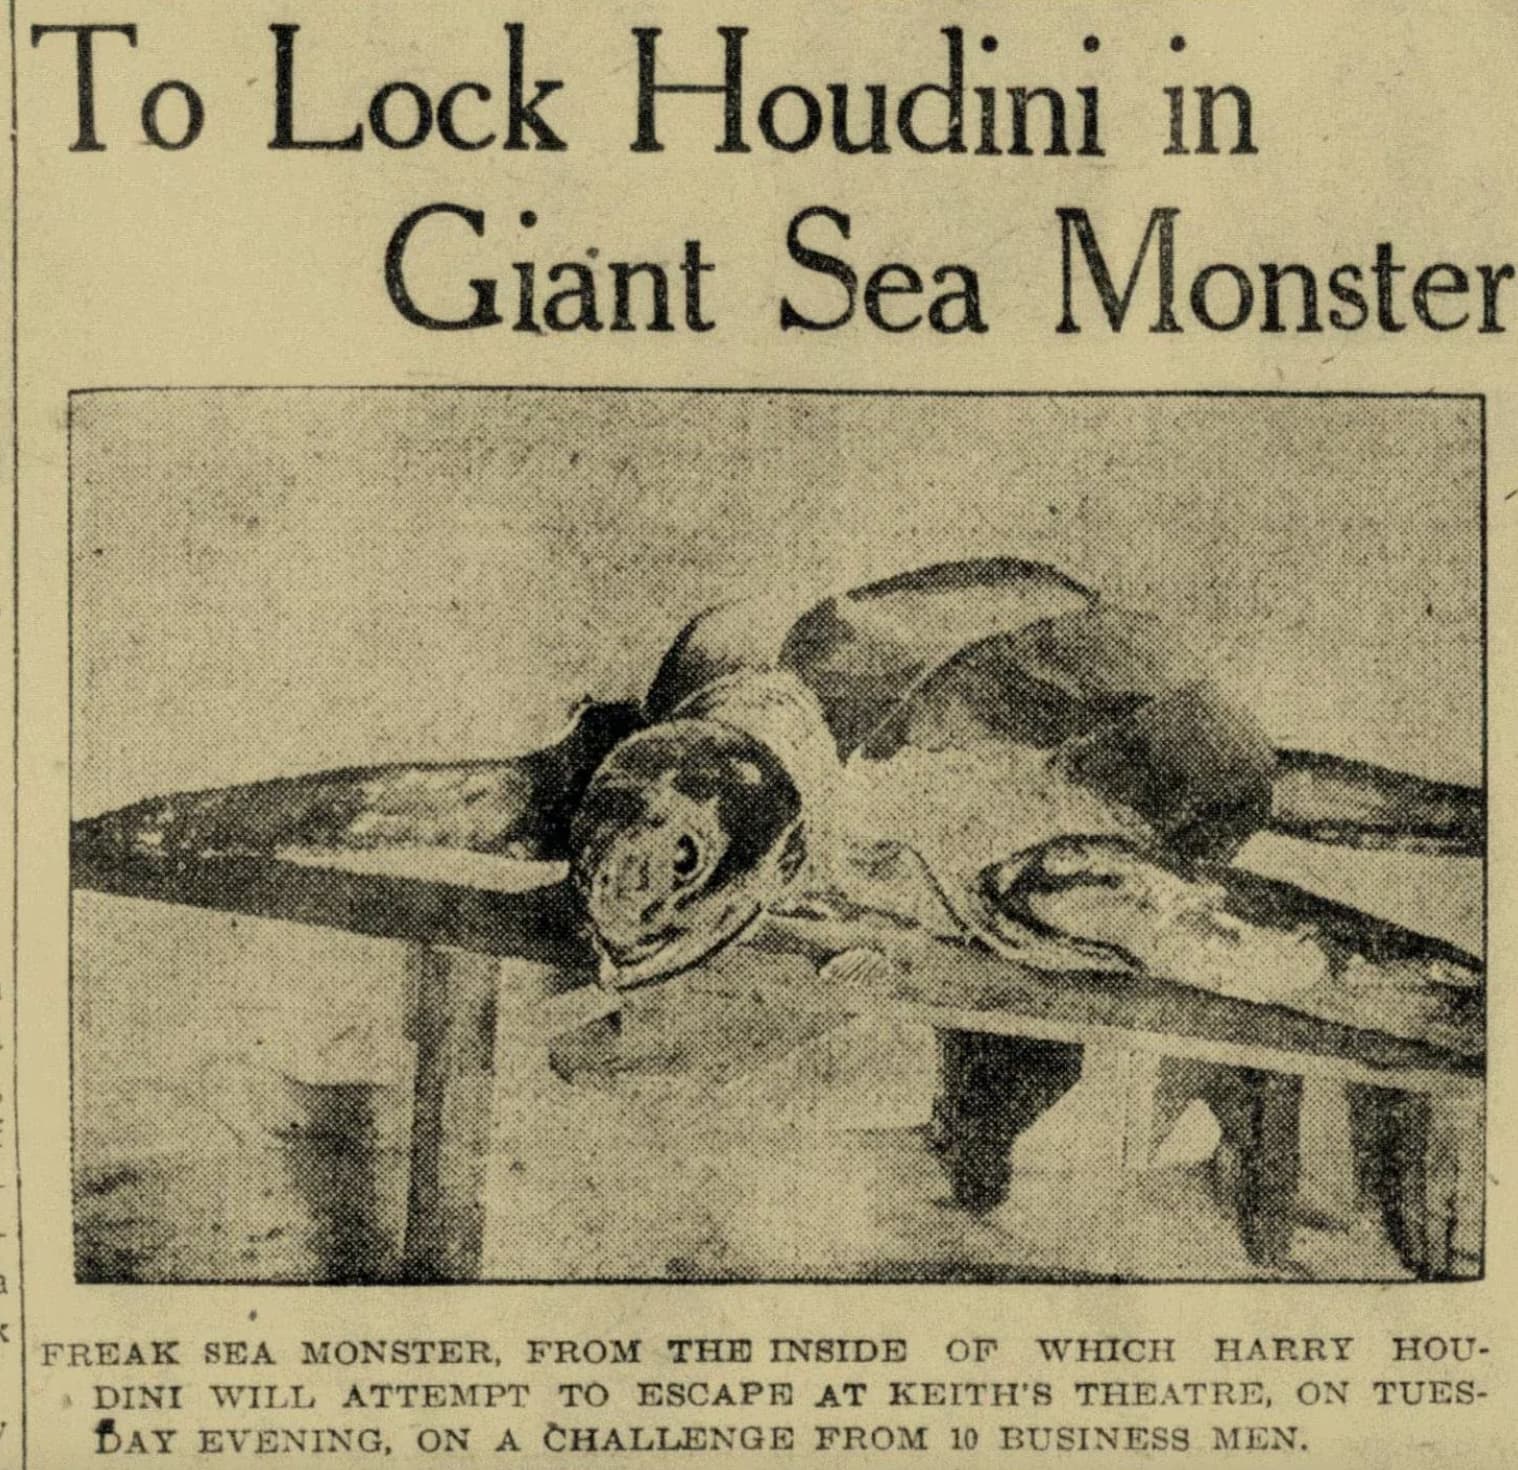 harry houdini sea turtle - To Lock Houdini in Giant Sea Monster Freak Sea Monster, From The Inside Of Which Harry Hou Dini Will Attempt To Escape At Keith'S Theatre, On Tues Bay Evening, On A Challenge From 10 Business Men.